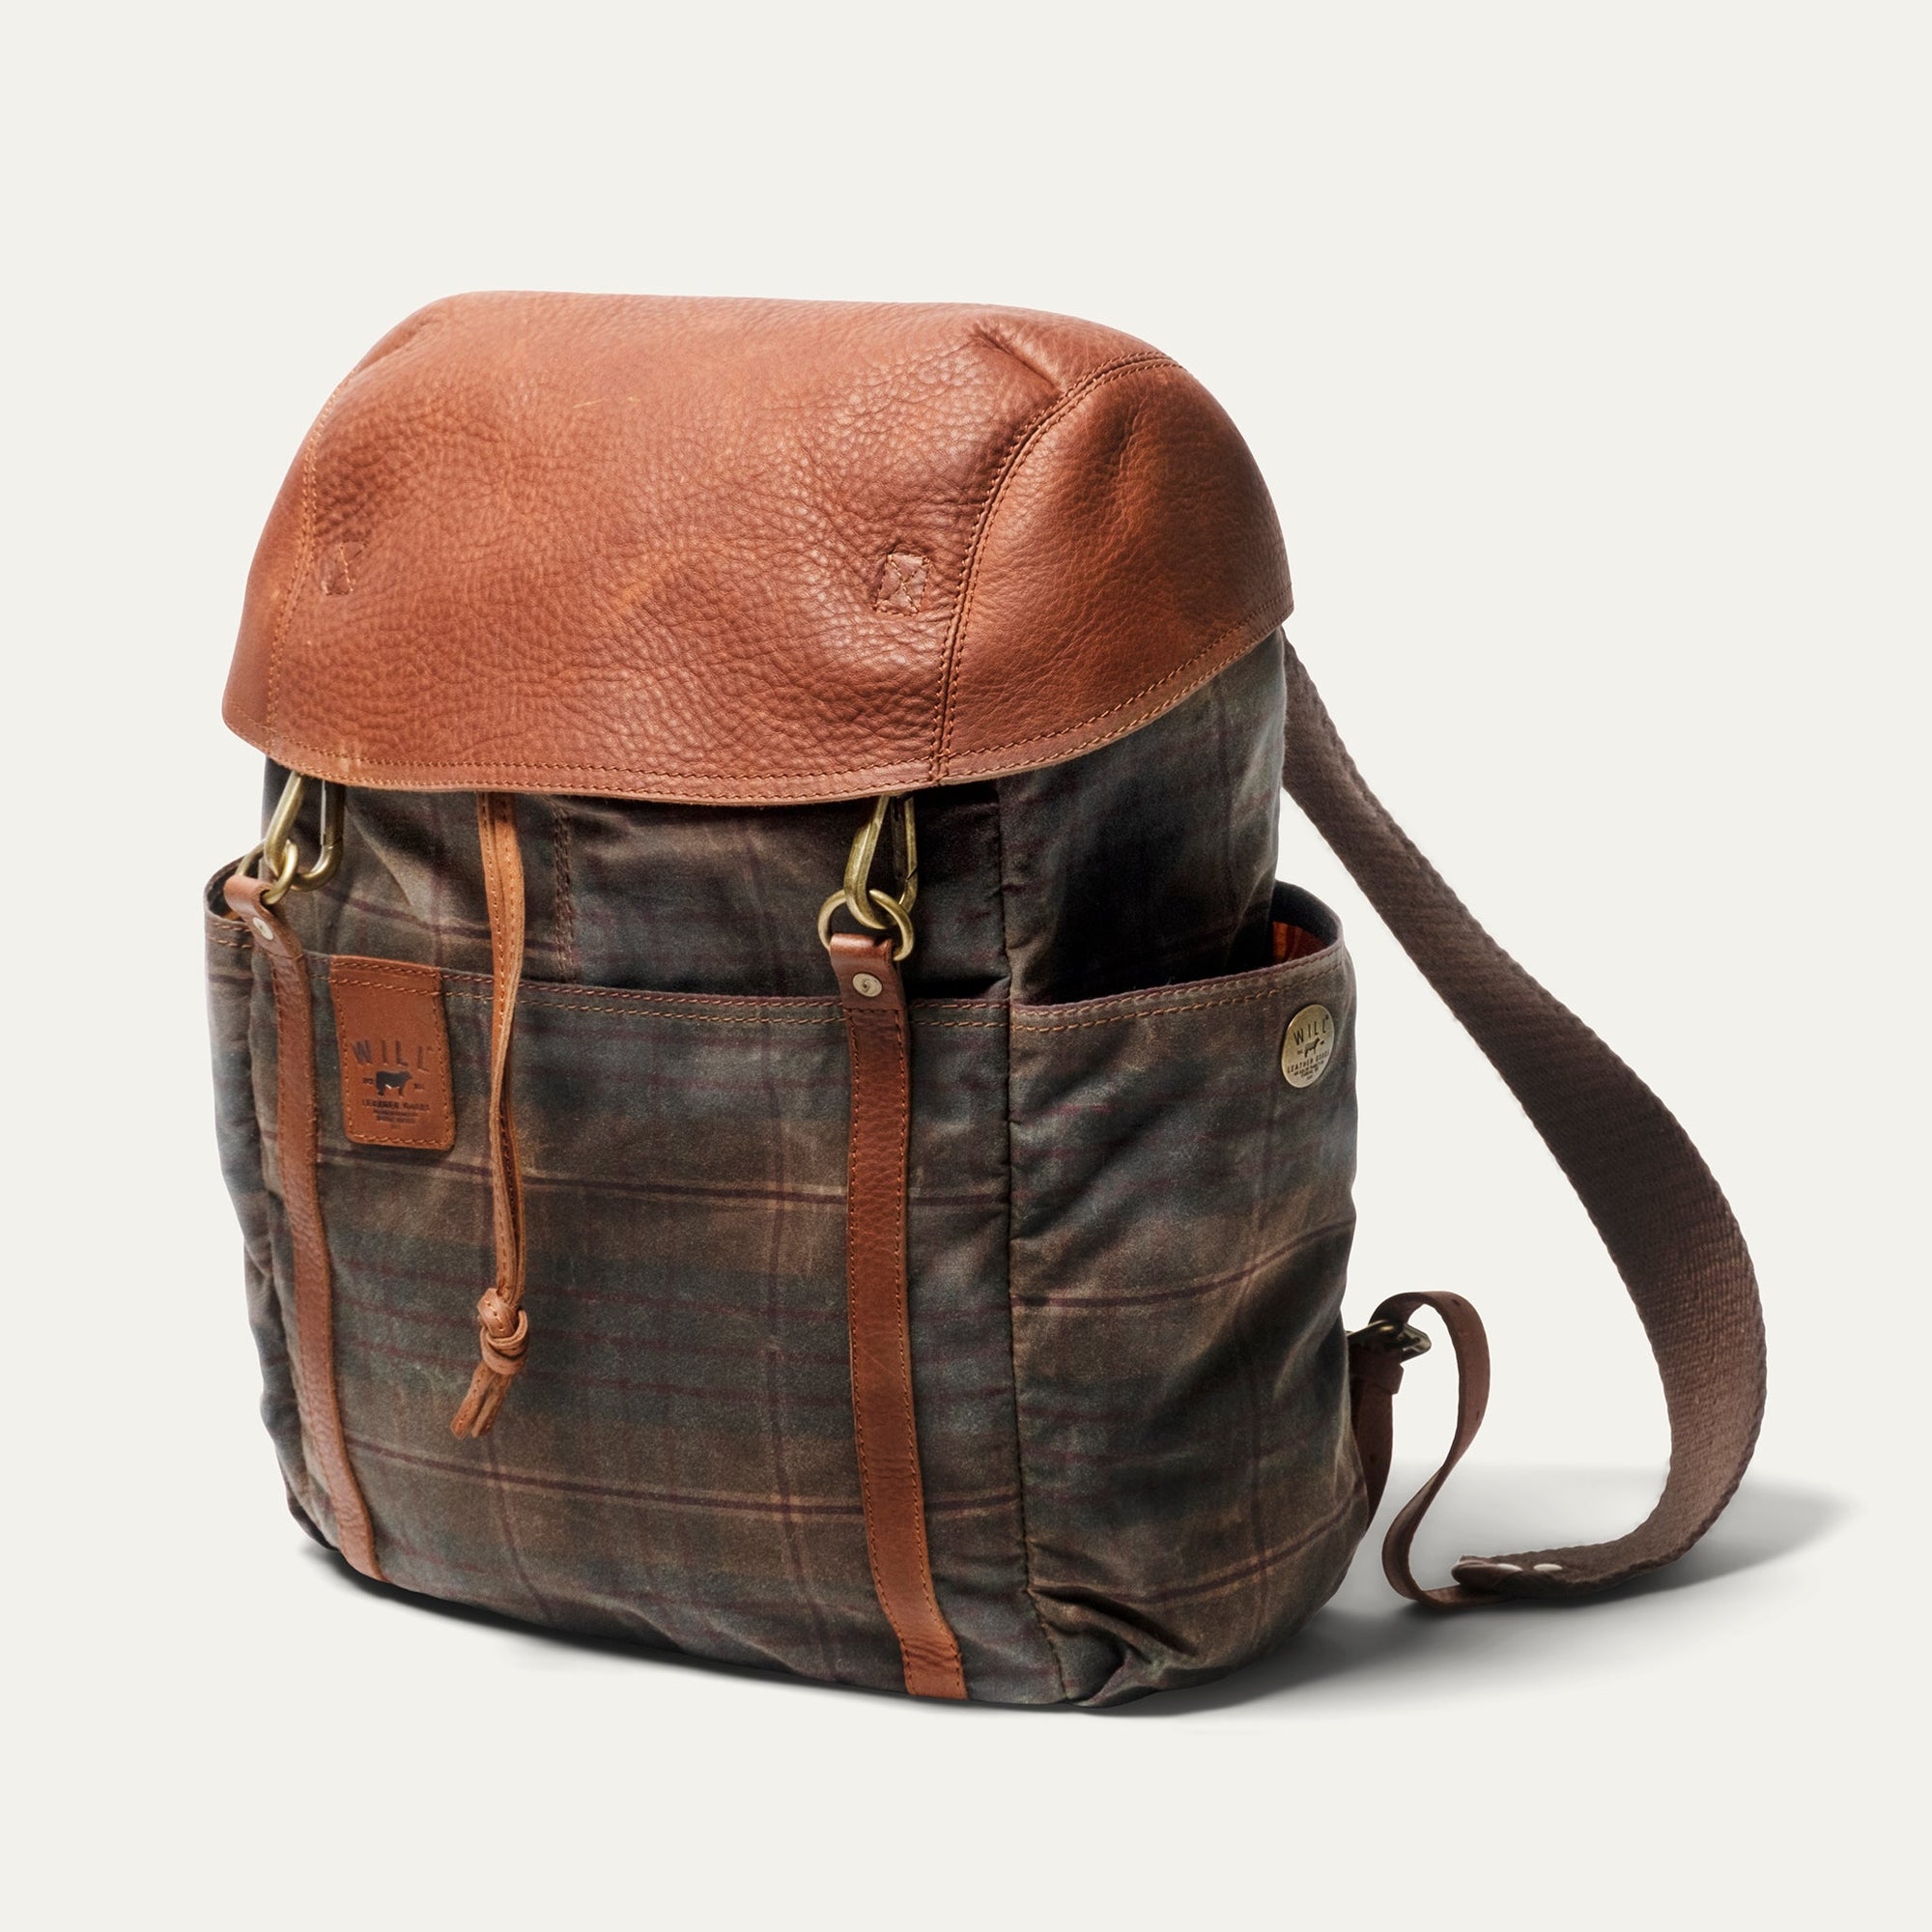 Sporting fit explorer - mahogany leather